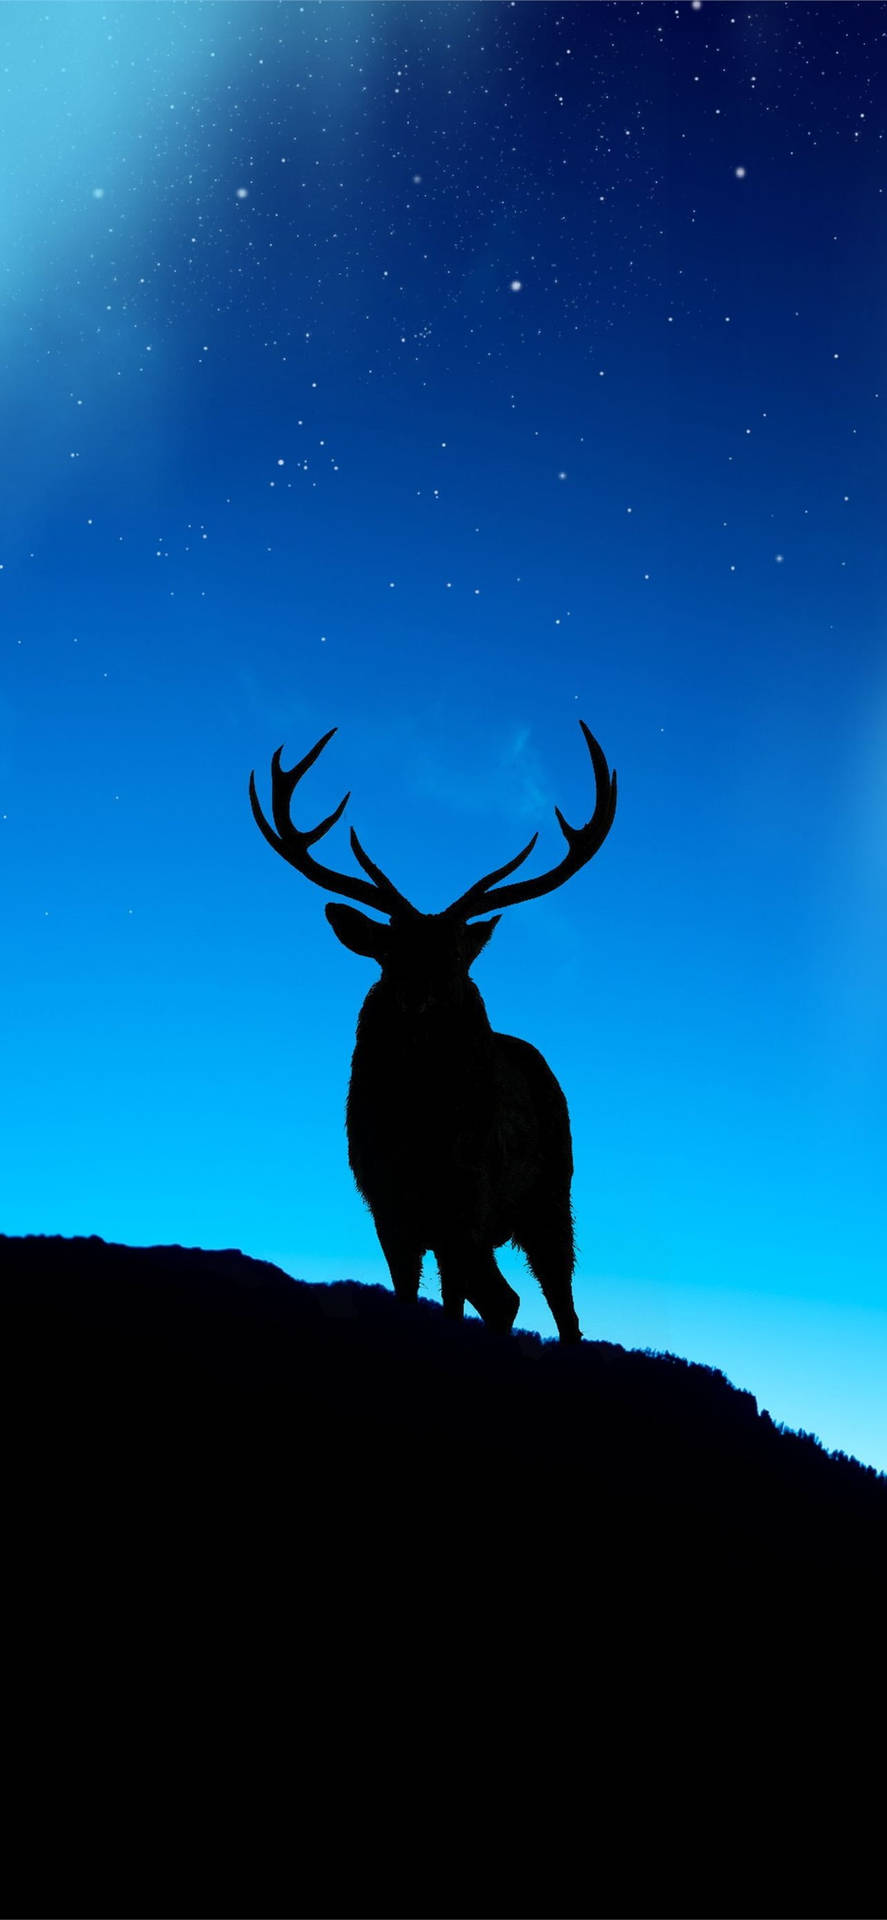 Discover Nature with our Deer Iphone Wallpaper